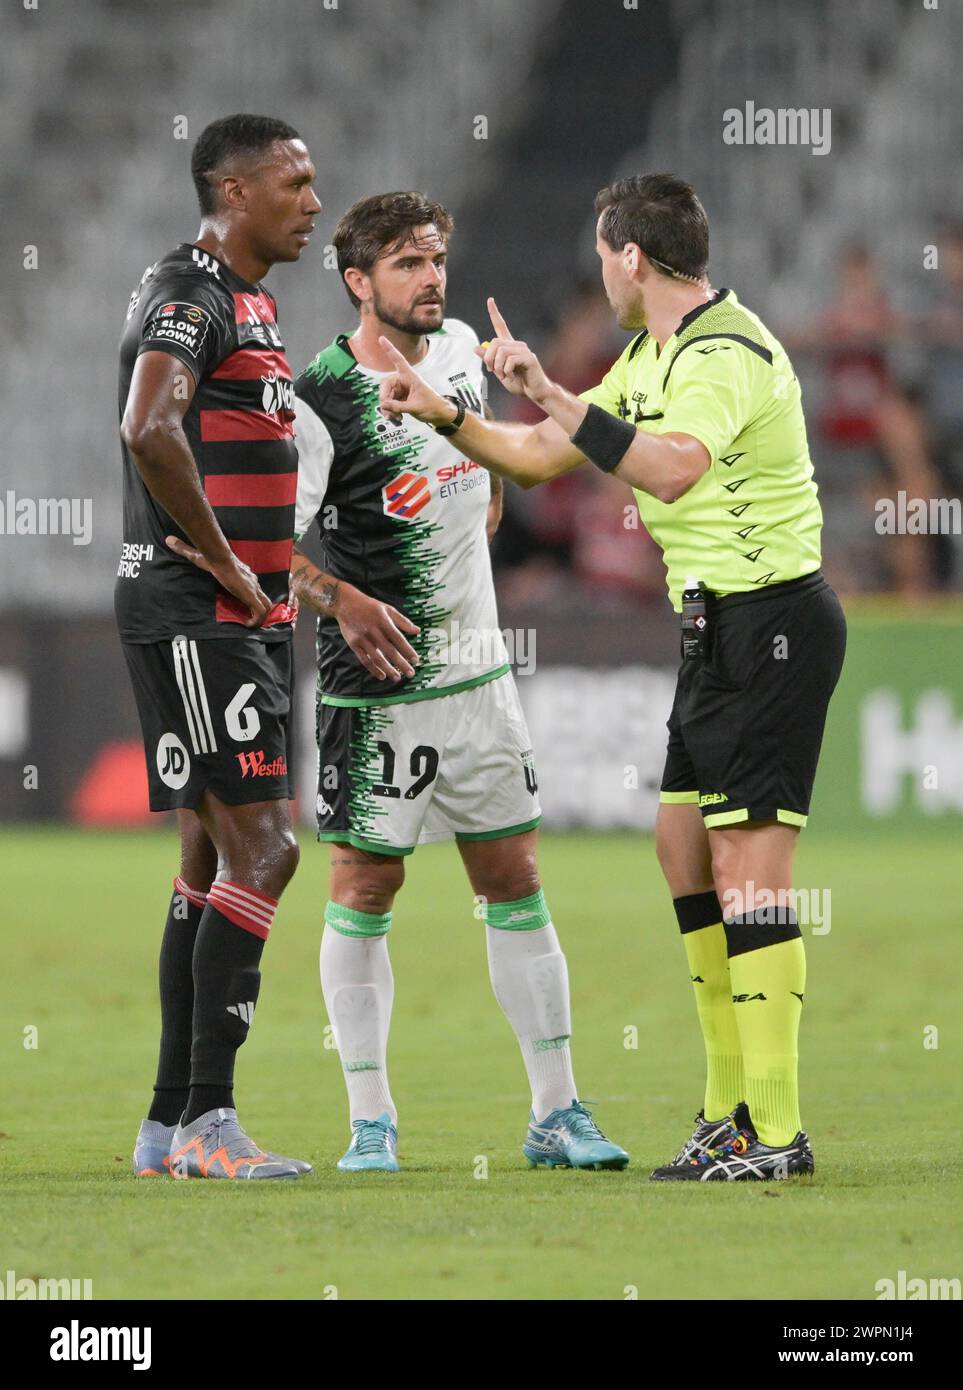 Parramatta, Australia. 08th Mar, 2024. Marcelo Antonio Guedes Filho (L) of Western Sydney Wanderers FC, Joshua Robert Risdon (M) of Western United FC team and referee Ben Abrahams (R) are seen during the Isuzu UTE A-League 2023-24 season round 20 match between Western Sydney Wanderers FC and Western United FC held at the CommBank Stadium. Final score Western United FC 3:1 Western Sydney Wanderers FC. Final score; Western United FC 3:1 Western Sydney Wanderers FC. Credit: SOPA Images Limited/Alamy Live News Stock Photo